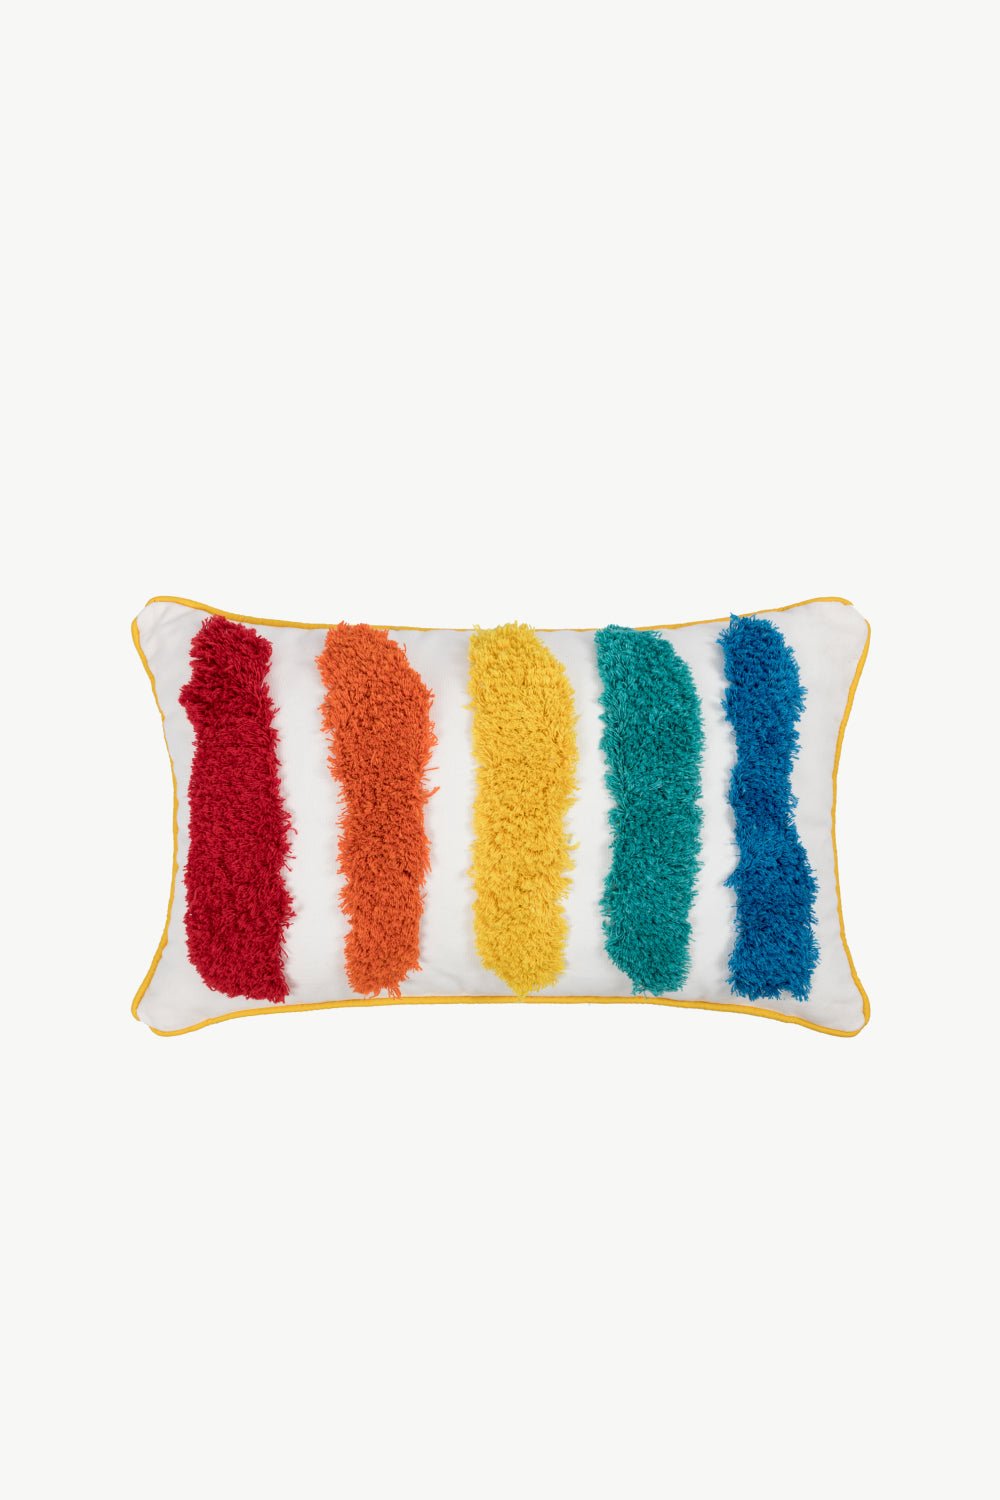 6 Styles Multicolored Pillow Cover - BloomBliss.com